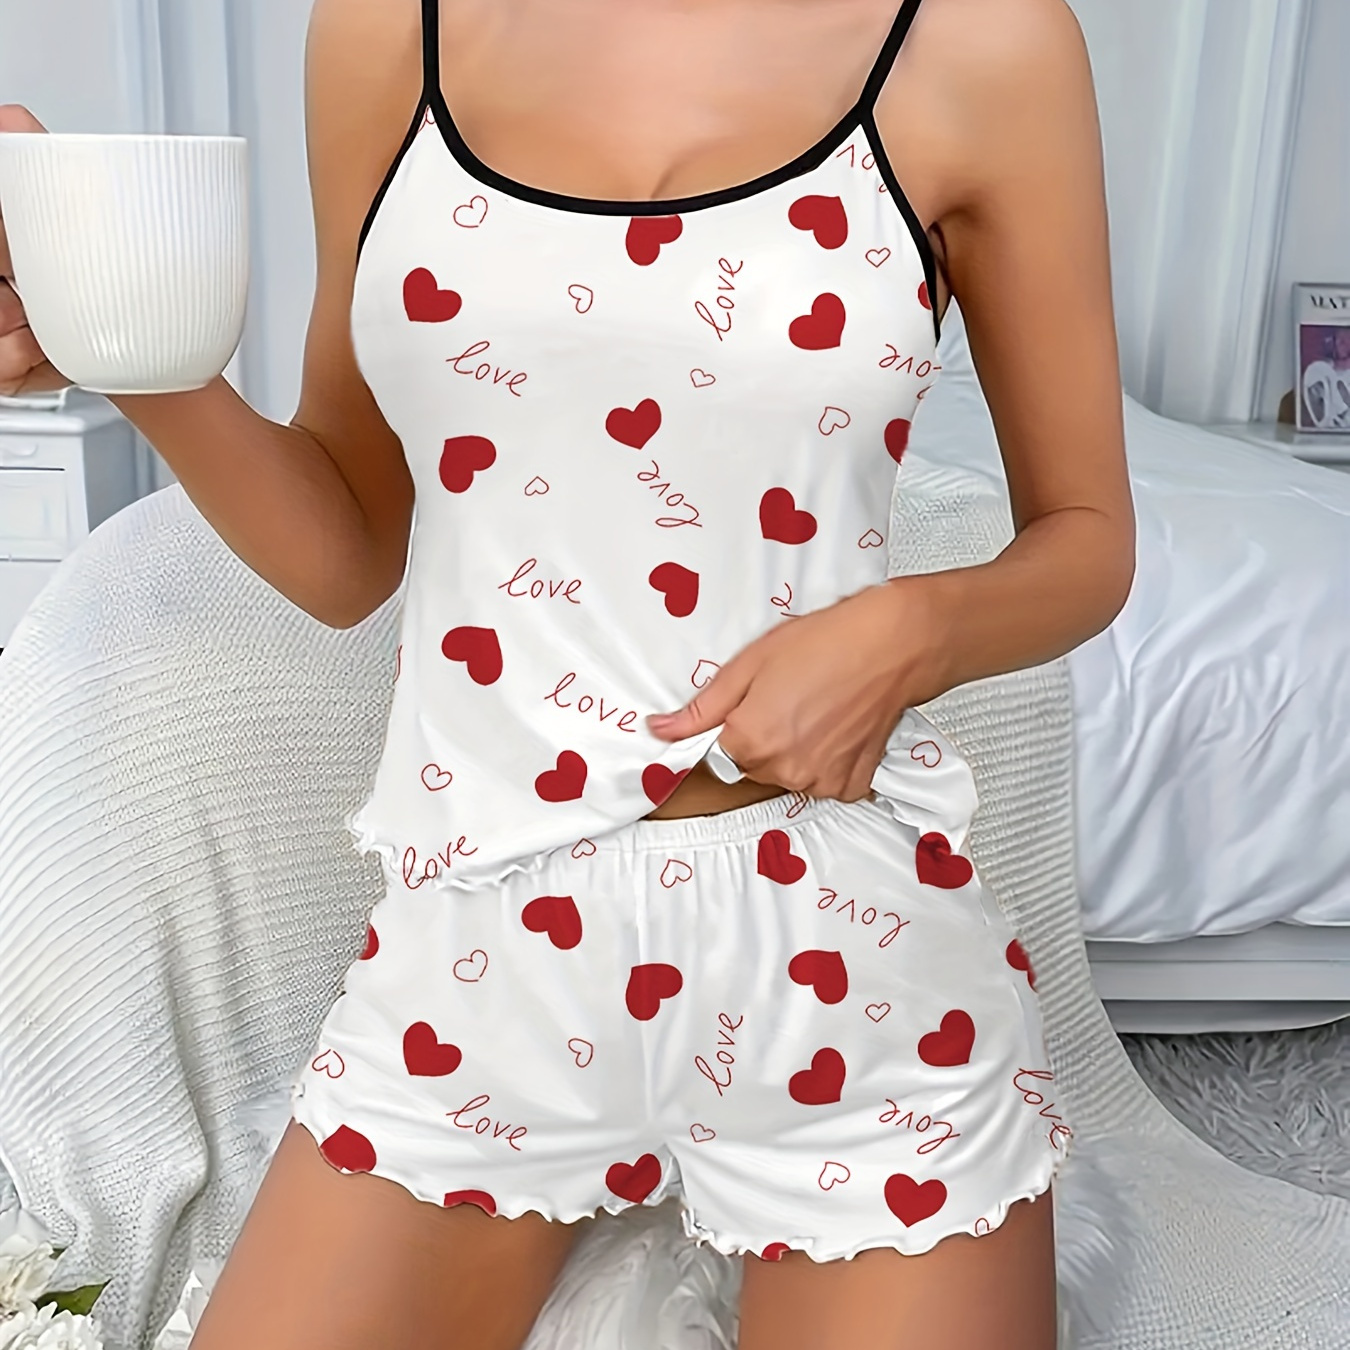 

Heart & Letter Print Frill Trim Pajama Set, Casual Round Neck Backless Cami Top & Elastic Shorts, Women's Sleepwear